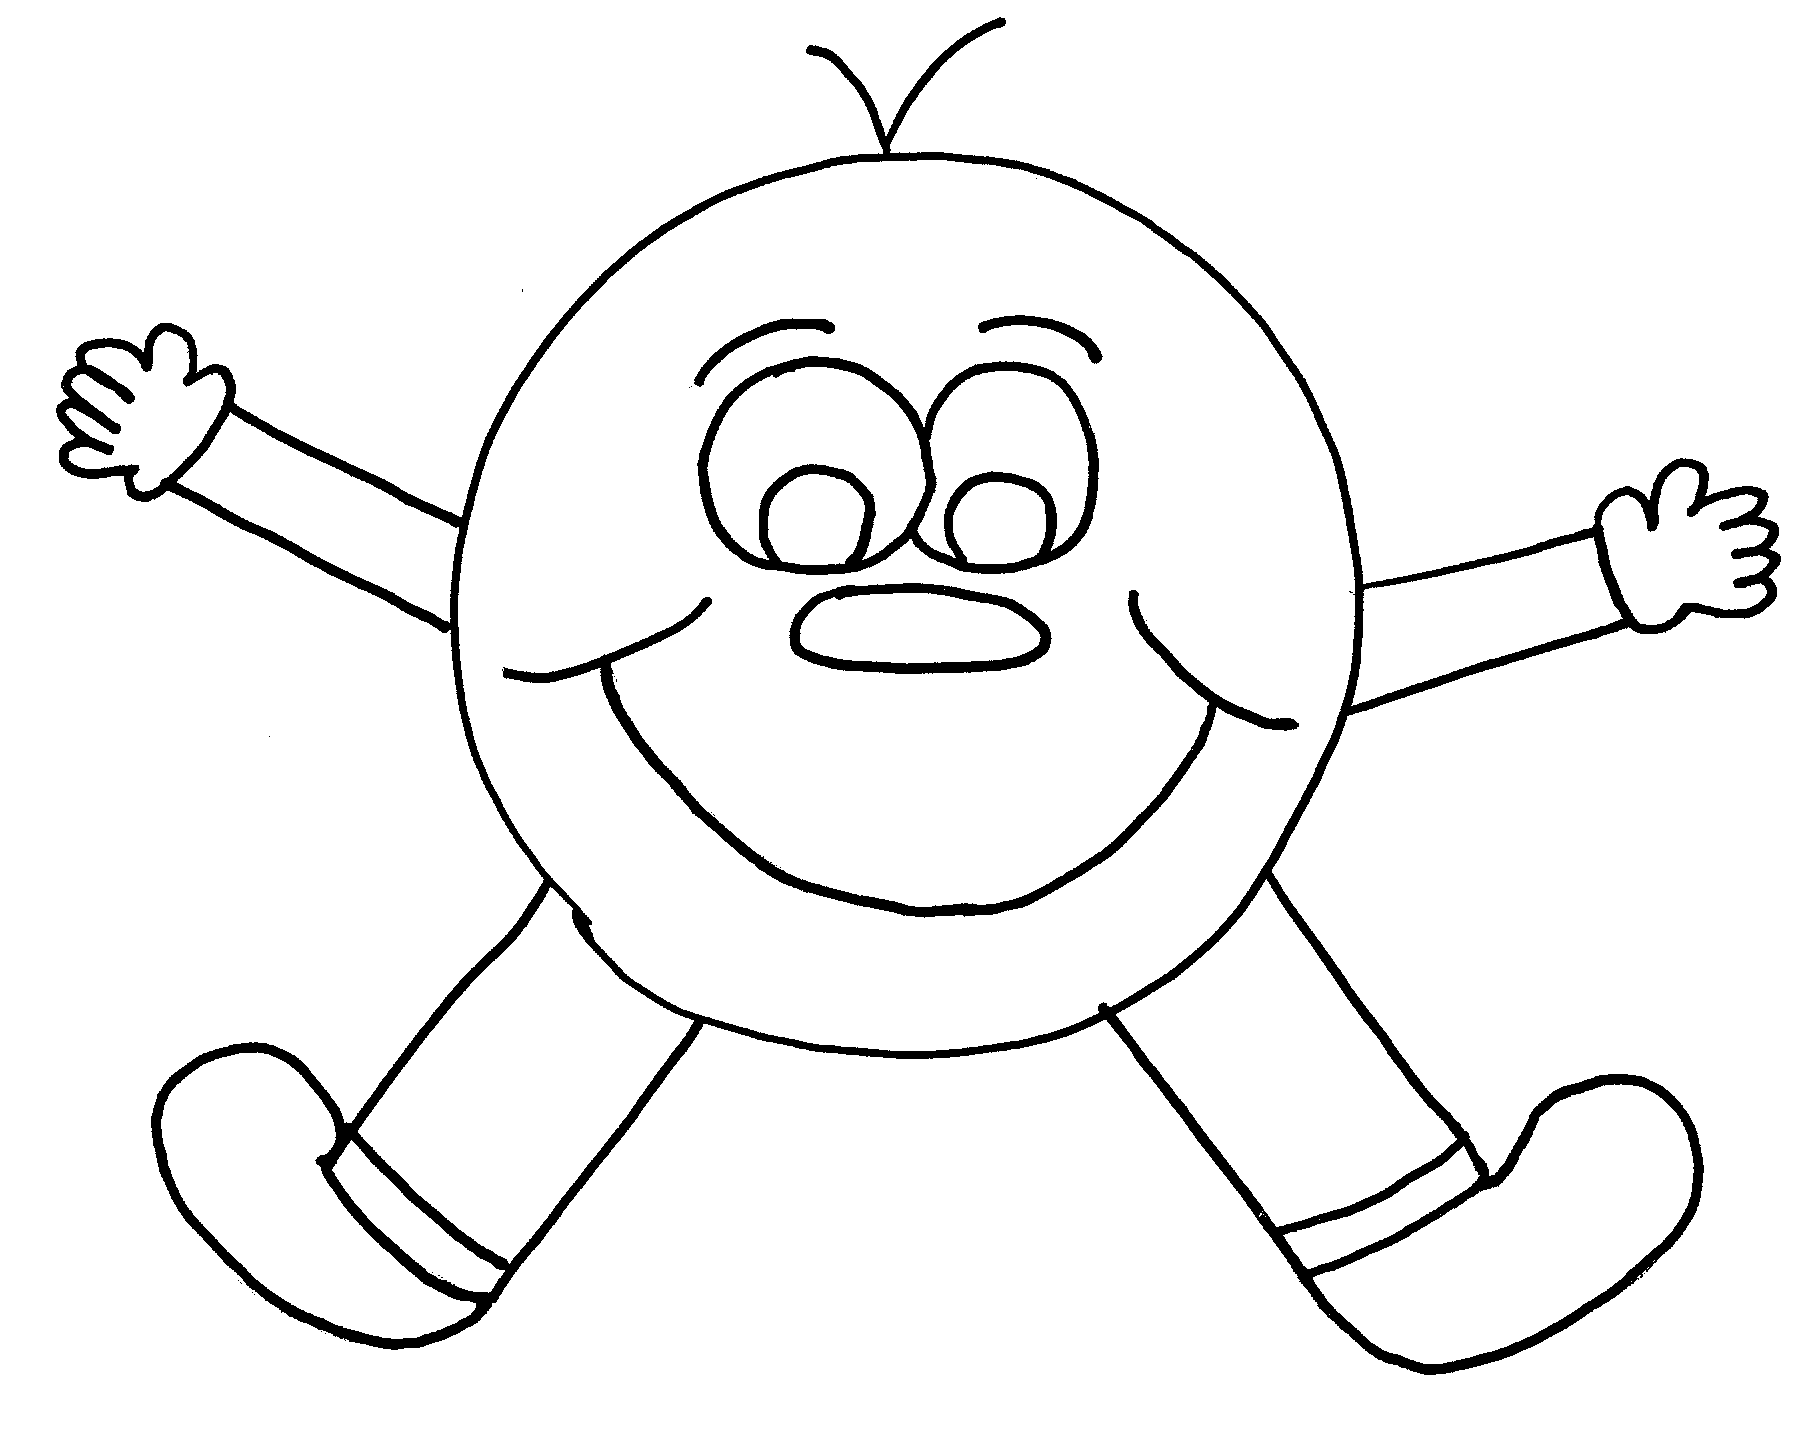 Free Printable Smiley Face Coloring Pages For Kids